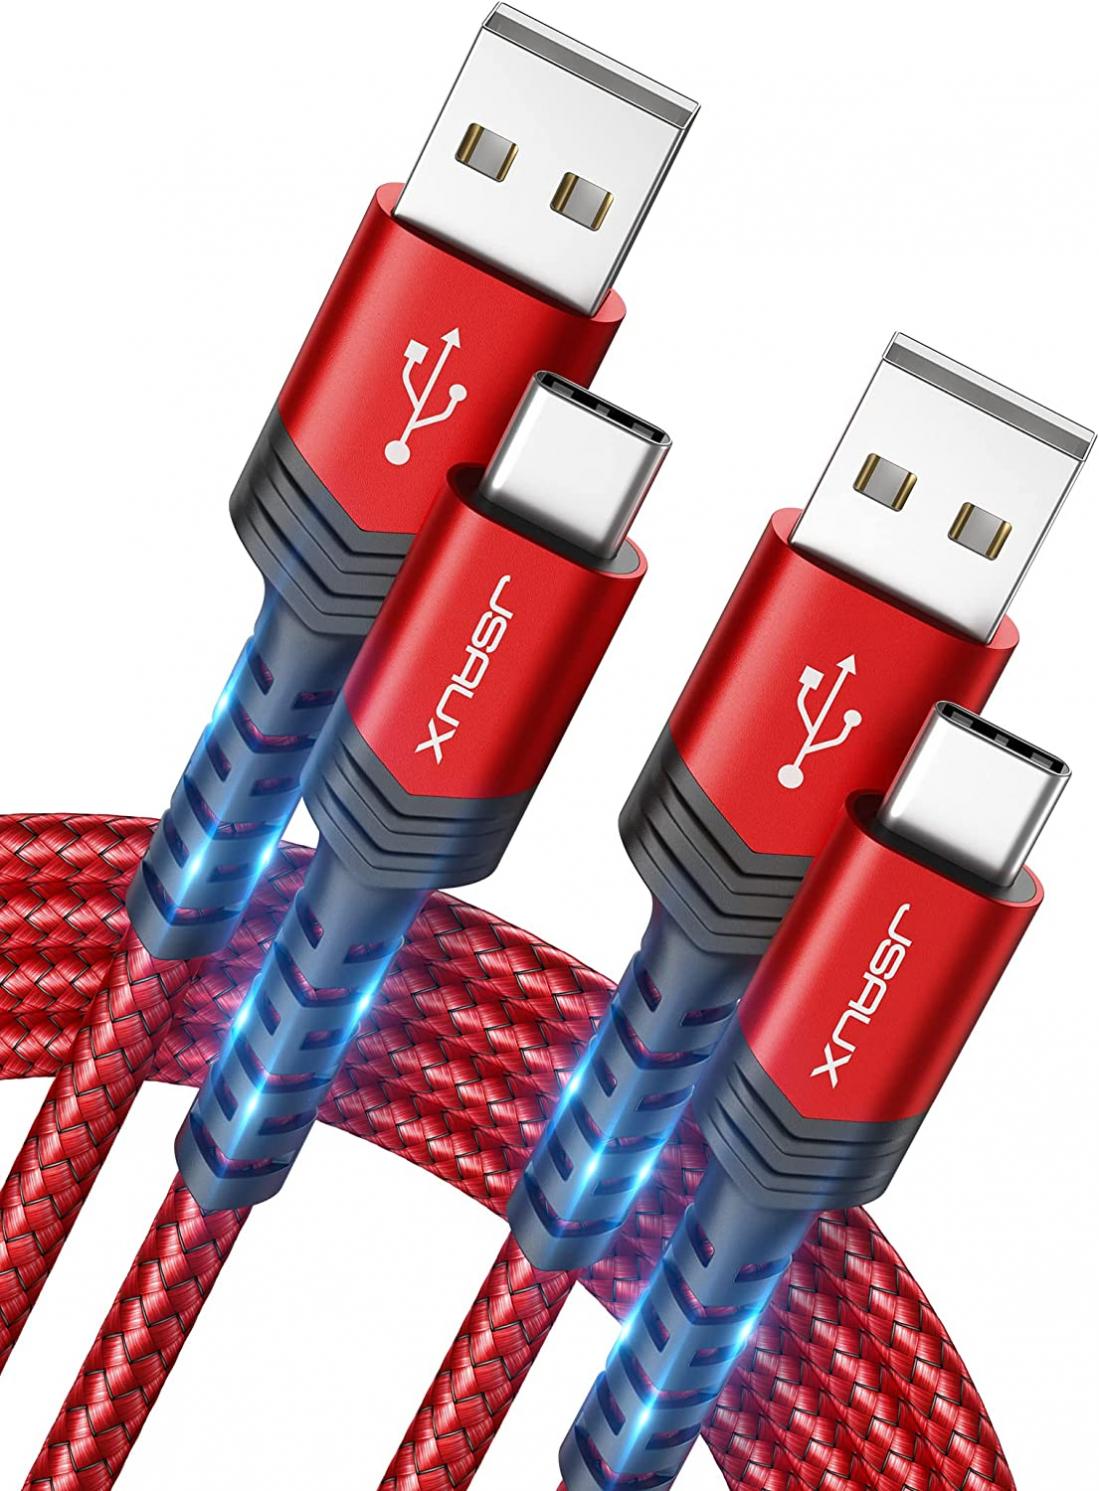 USB-C to USB A Cable 3.1A Fast Charging [2-Pack 6.6ft], JSAUX USB Type C Charger Cord Compatible with Samsung Galaxy S20 S10 S9 S8 A73 A51 A13, Note 20 10, LG G8 G7, PS5 Controller USB C Charger-Red